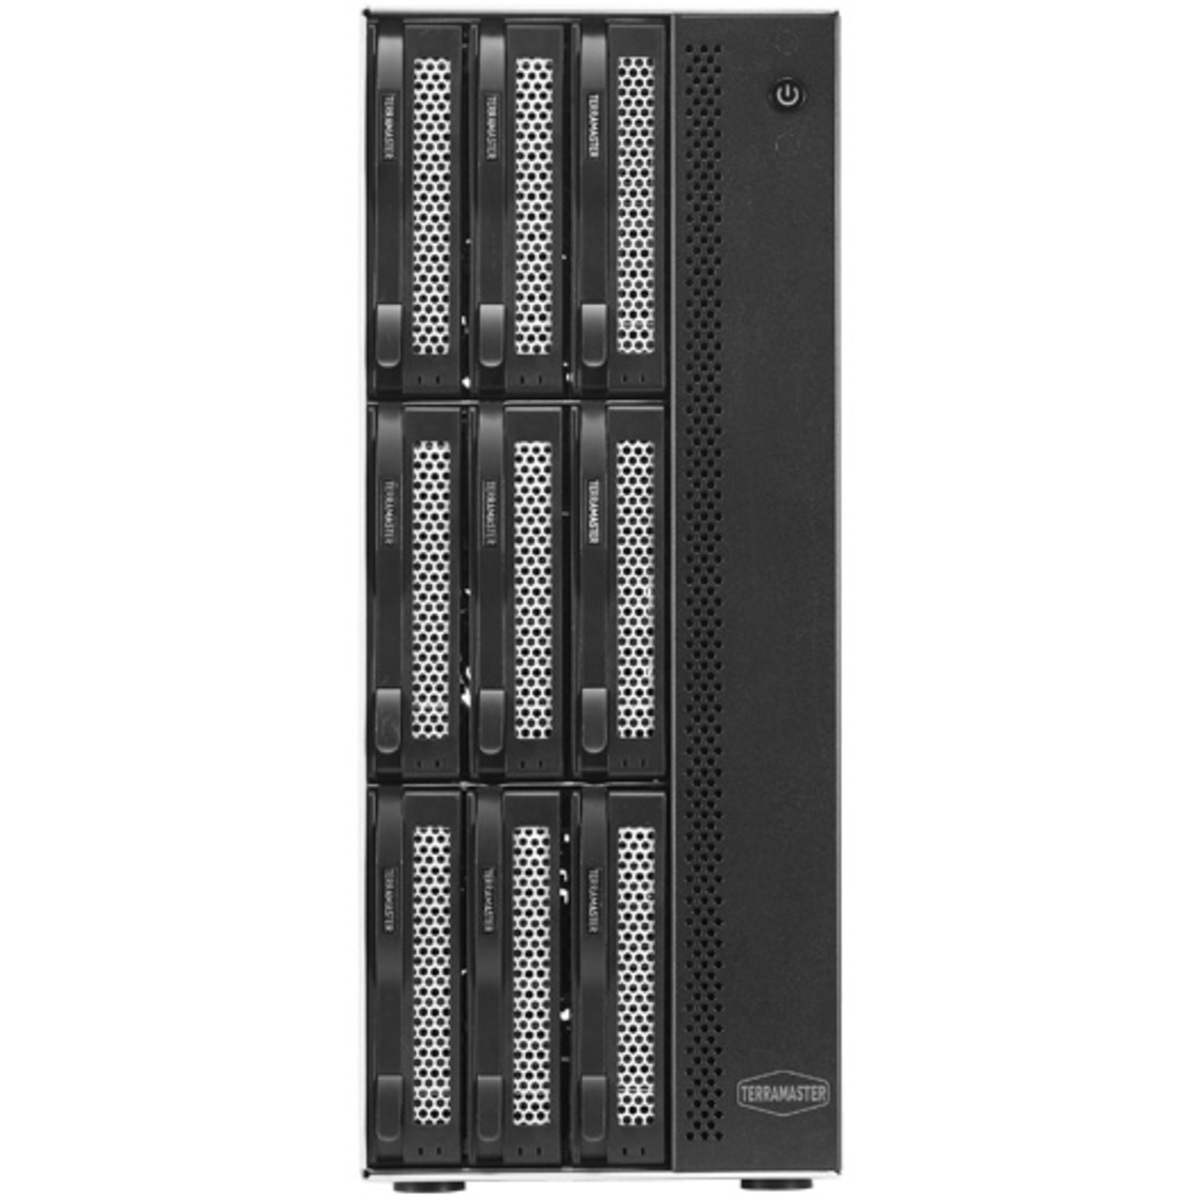 TerraMaster T9-423 60tb 9-Bay Desktop Multimedia / Power User / Business NAS - Network Attached Storage Device 6x10tb Seagate IronWolf ST10000VN000 3.5 7200rpm SATA 6Gb/s HDD NAS Class Drives Installed - Burn-In Tested T9-423